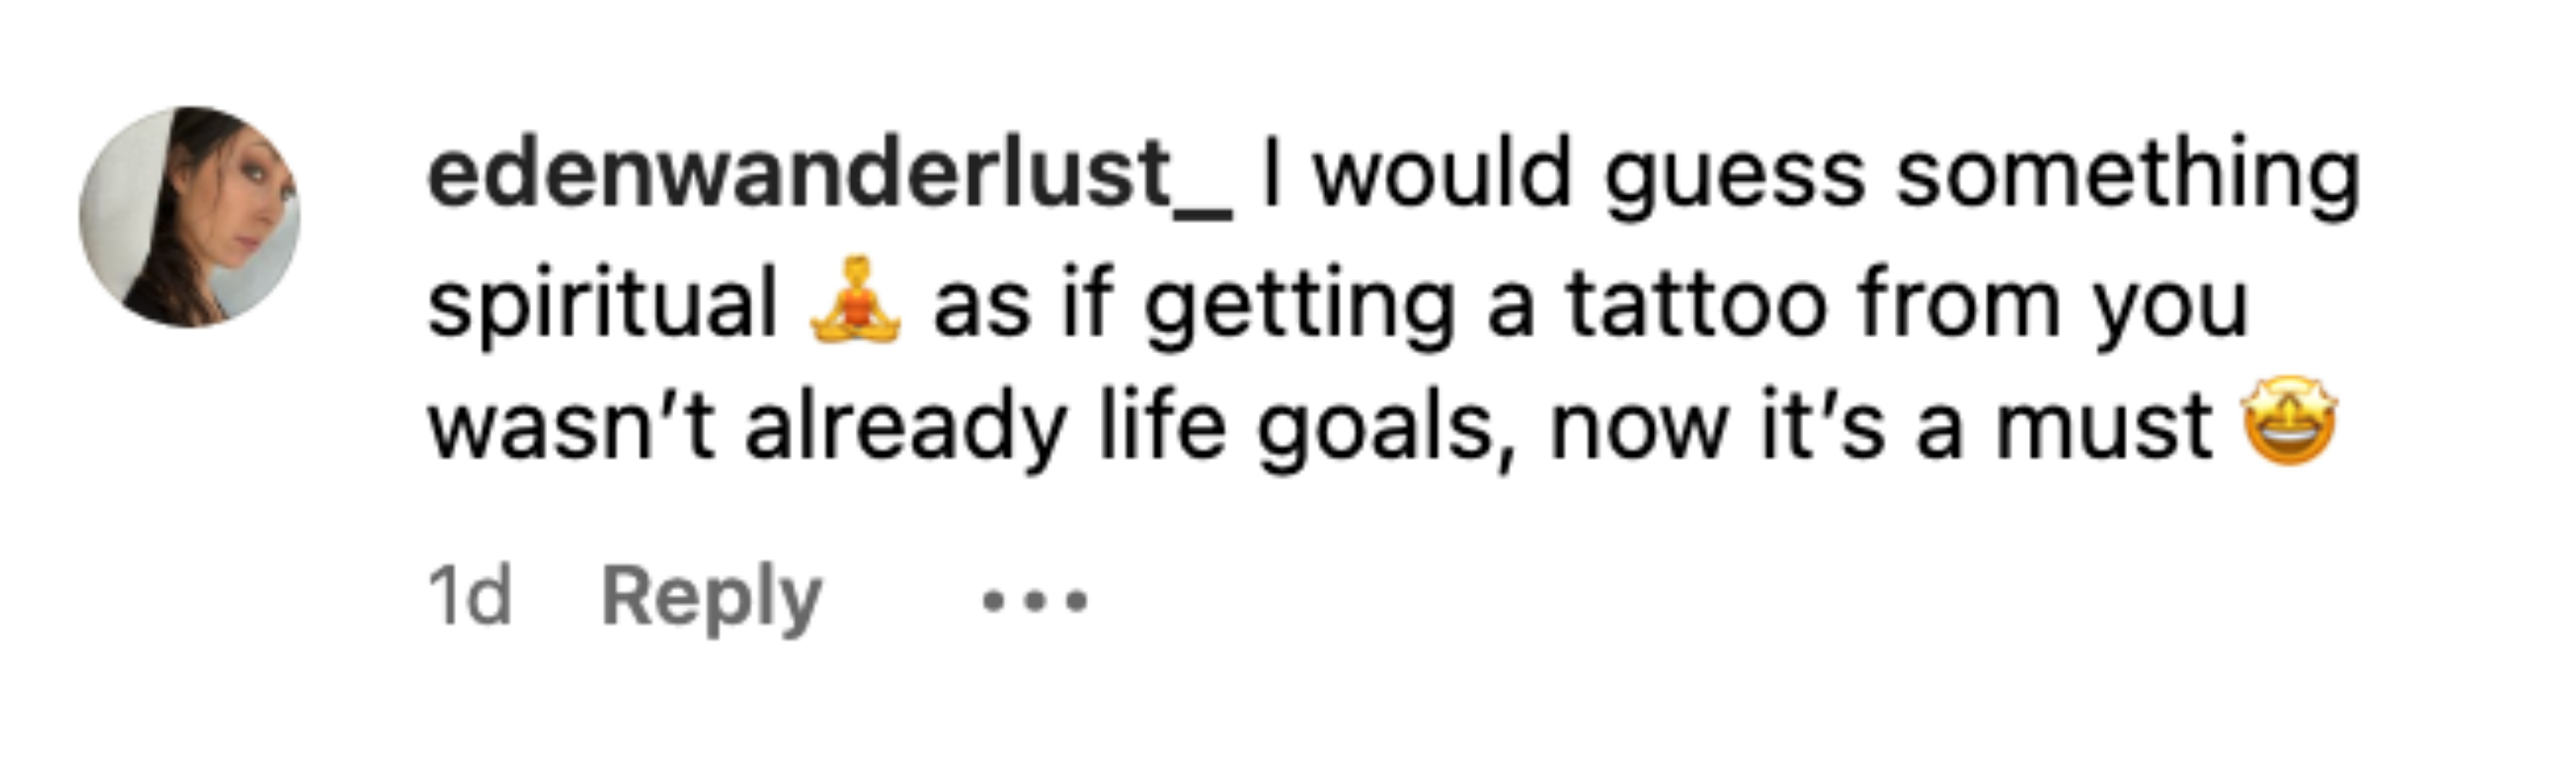 I would guess something spiritual as if getting a tattoo from you wasn&#x27;t already life goals, now it&#x27;s a must